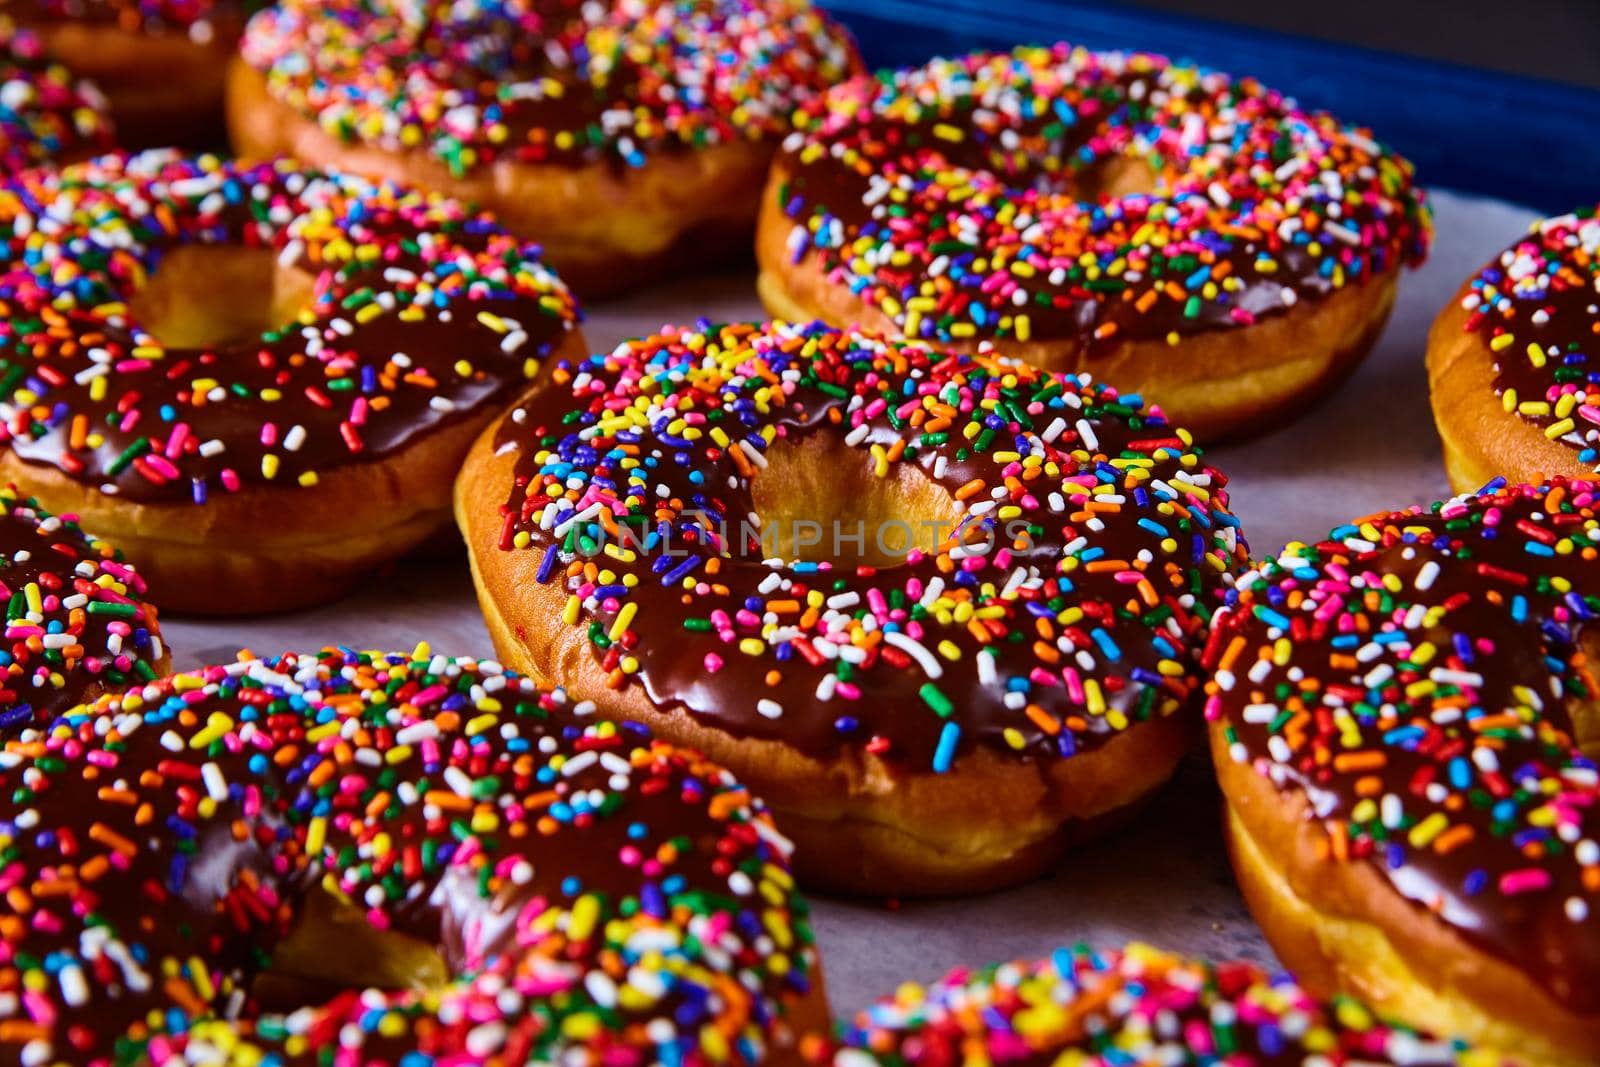 Image of Tray full of fresh baked yeast donuts with chocolate and colorful sprinkles